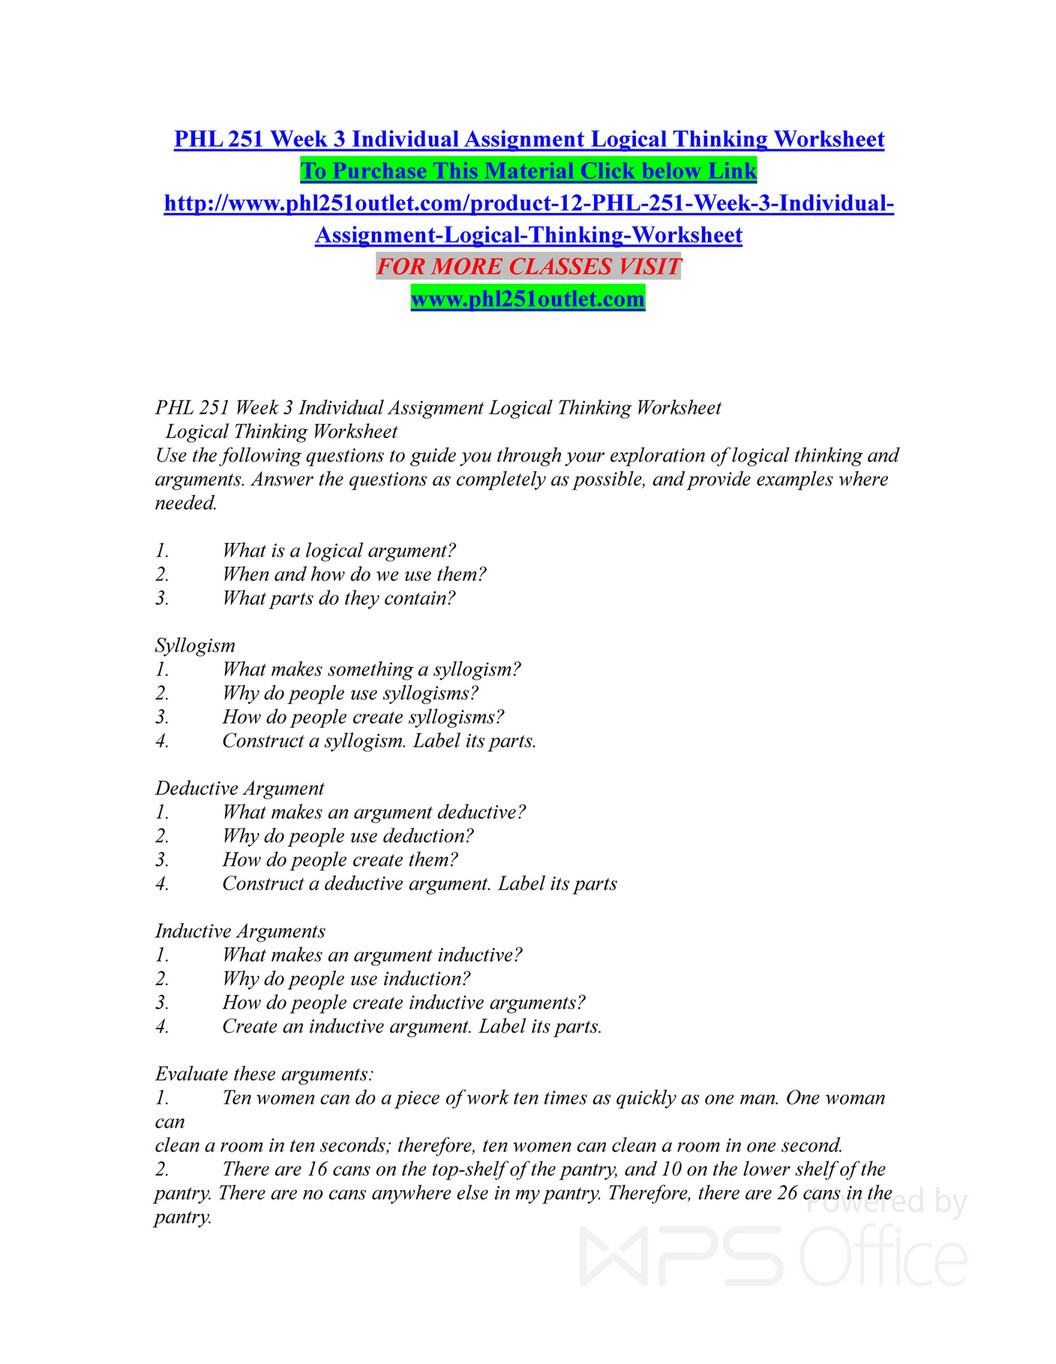 Inductive and Deductive Reasoning Worksheet My Publications Phl 251 Week 3 Individual assignment